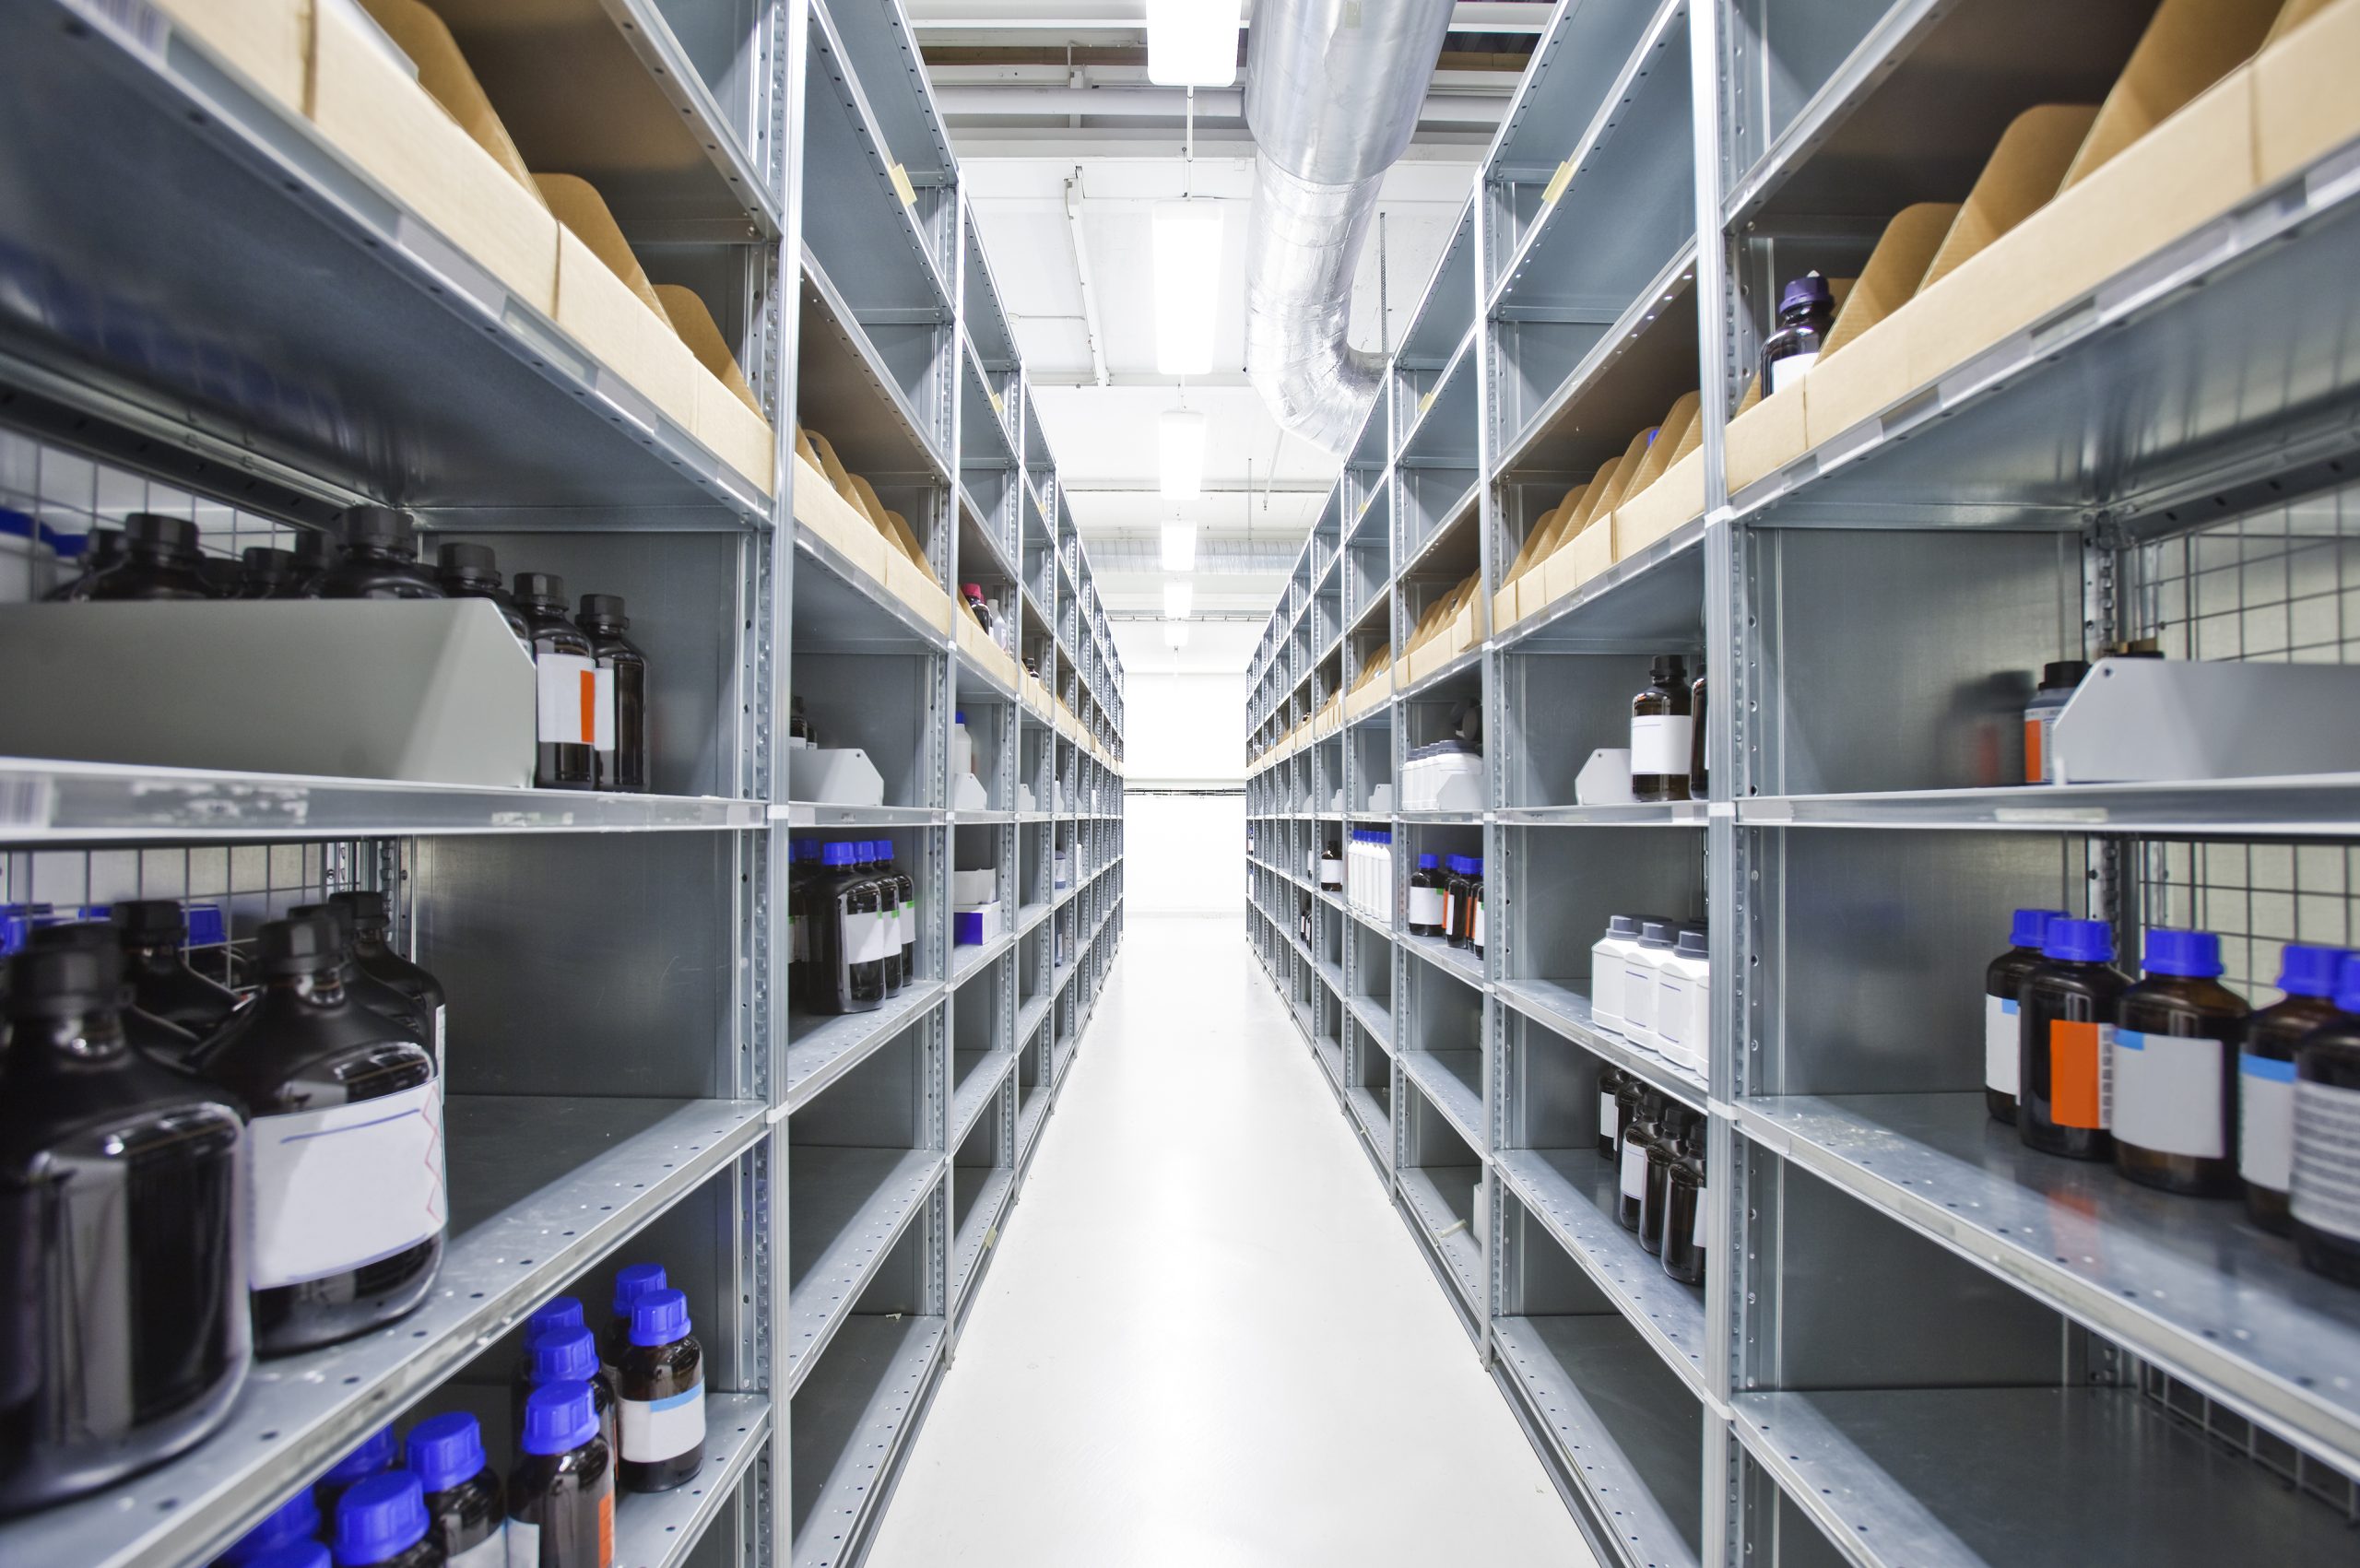 Neatly organized chemical storage with rows of labeled chemical bottles on metal shelving in a clean, well-lit facility.